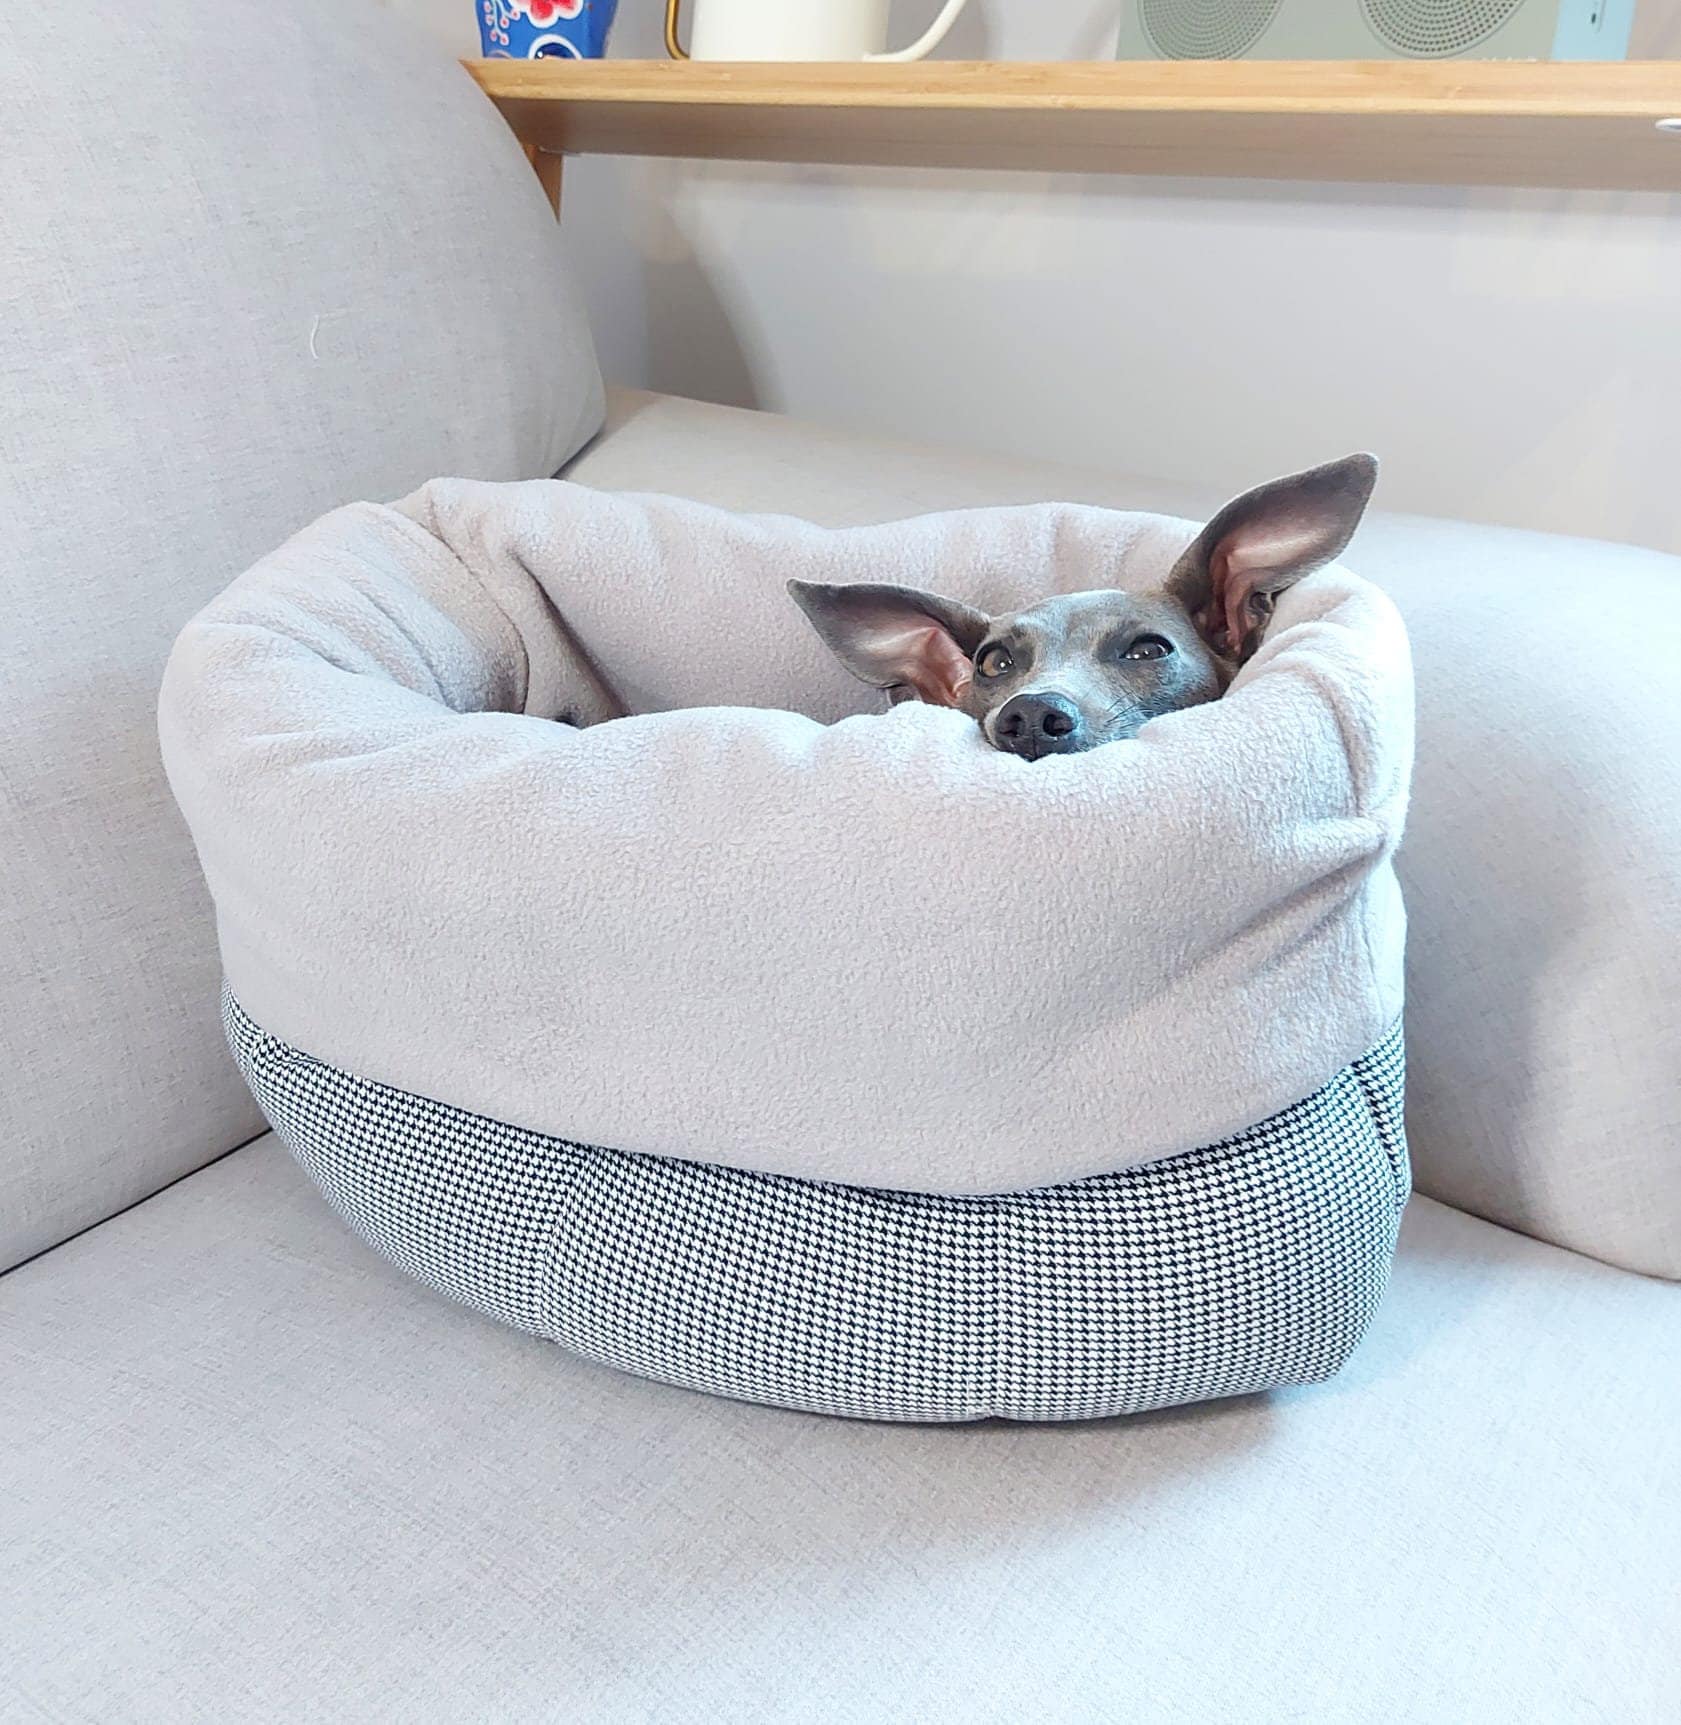 Cozy Pets Brown & Teal Premium Quality Natural | Handmade Luxury Ped Bed